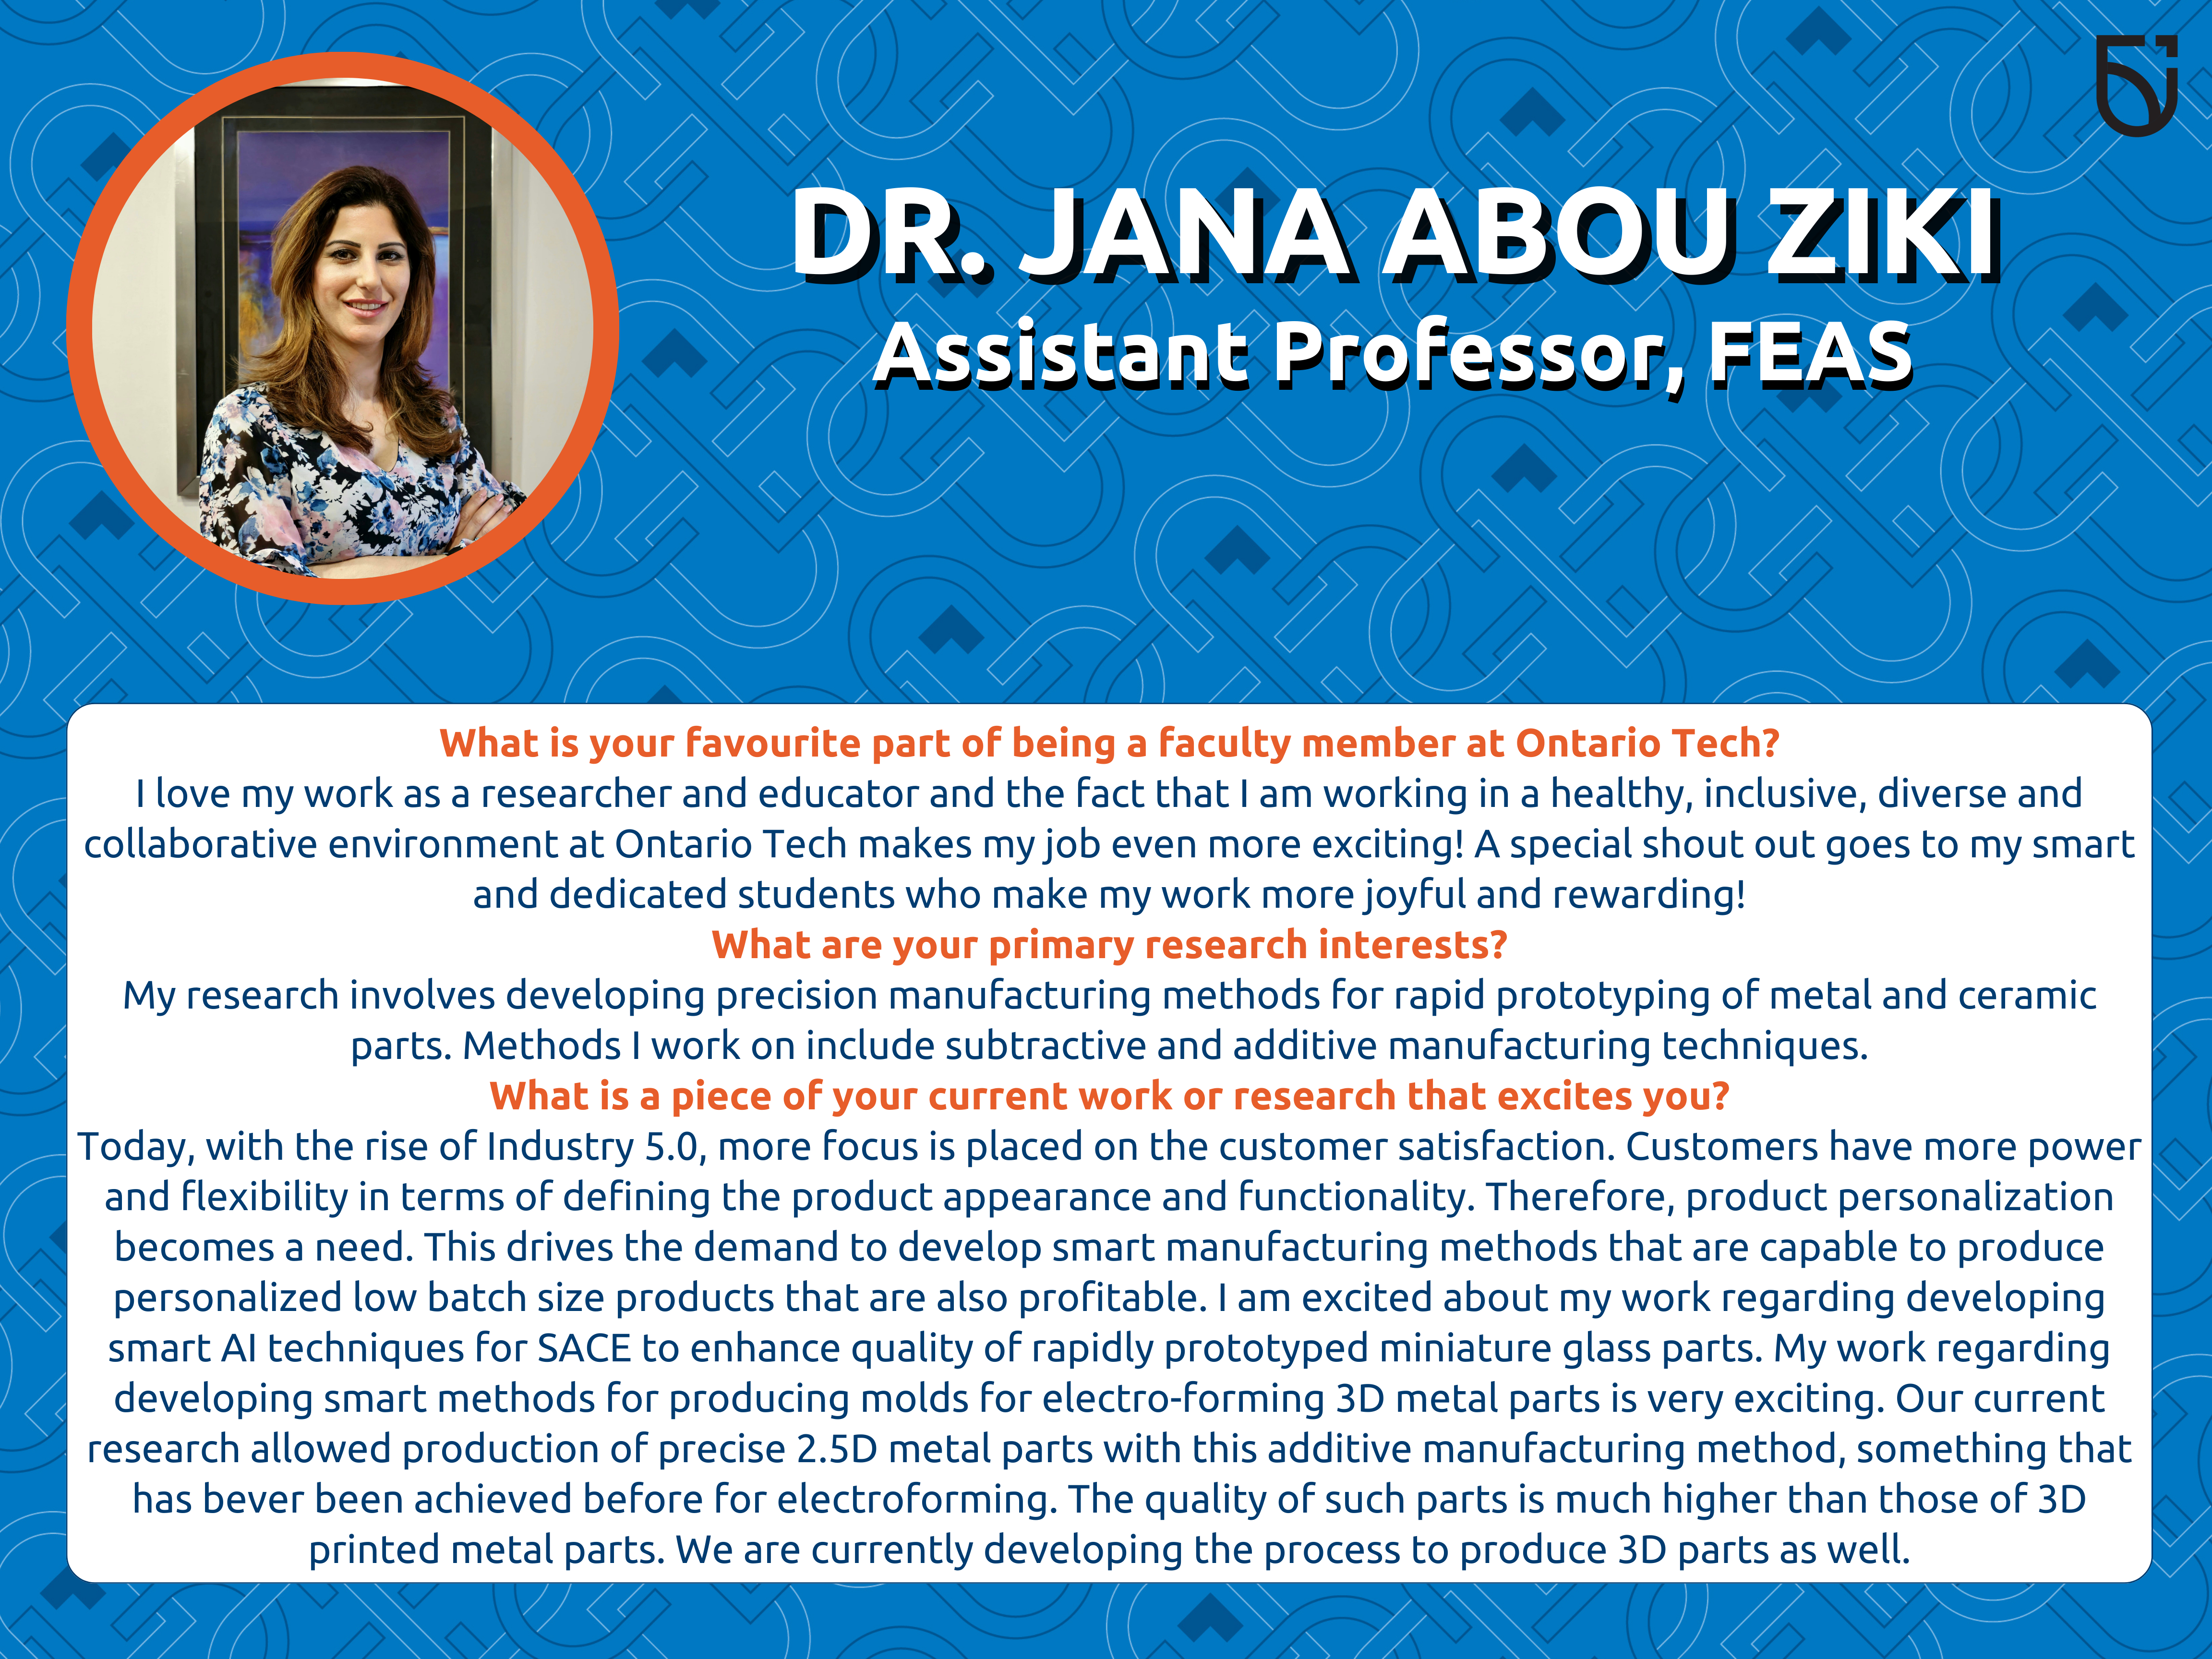 This photo is a Women’s Wednesday feature of Dr. Jana Abou Ziki, an Assistant Professor in the Faculty of Engineering and Applied Science.